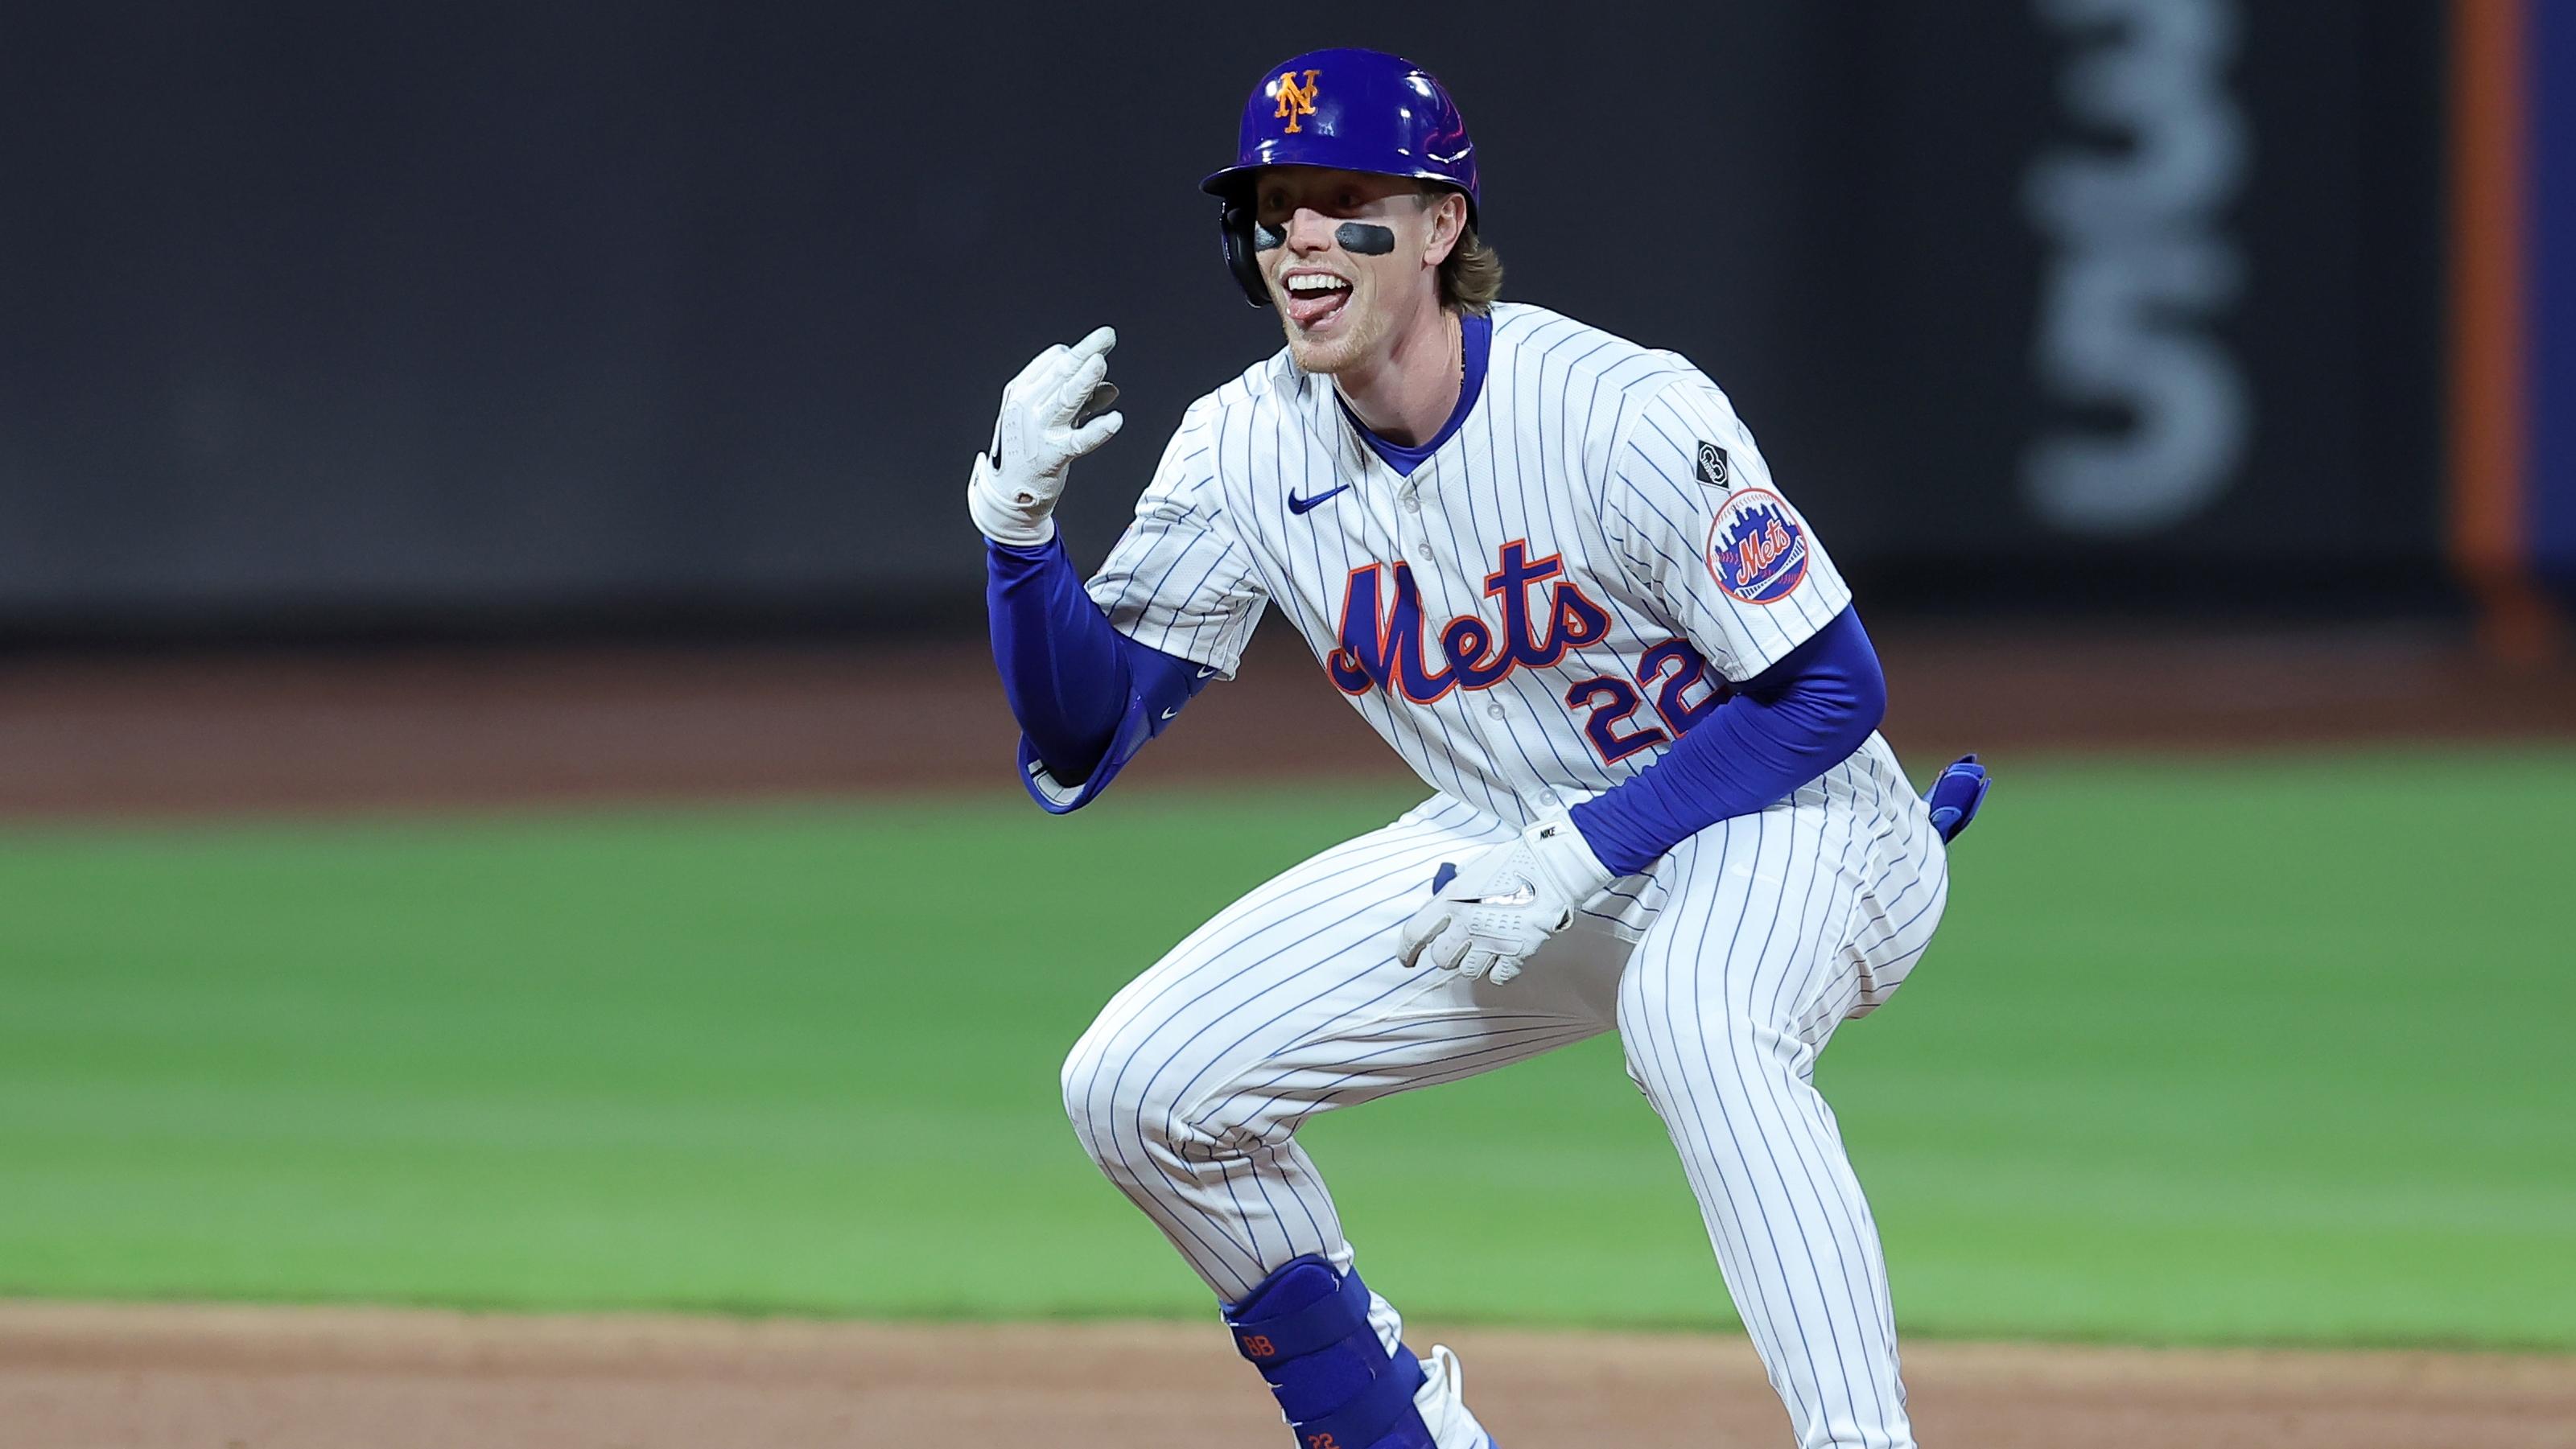 New York Mets third baseman Brett Baty (22) reacts after hitting a two run double against the Kansas City Royals during the fifth inning at Citi Field. / Brad Penner-USA TODAY Sports